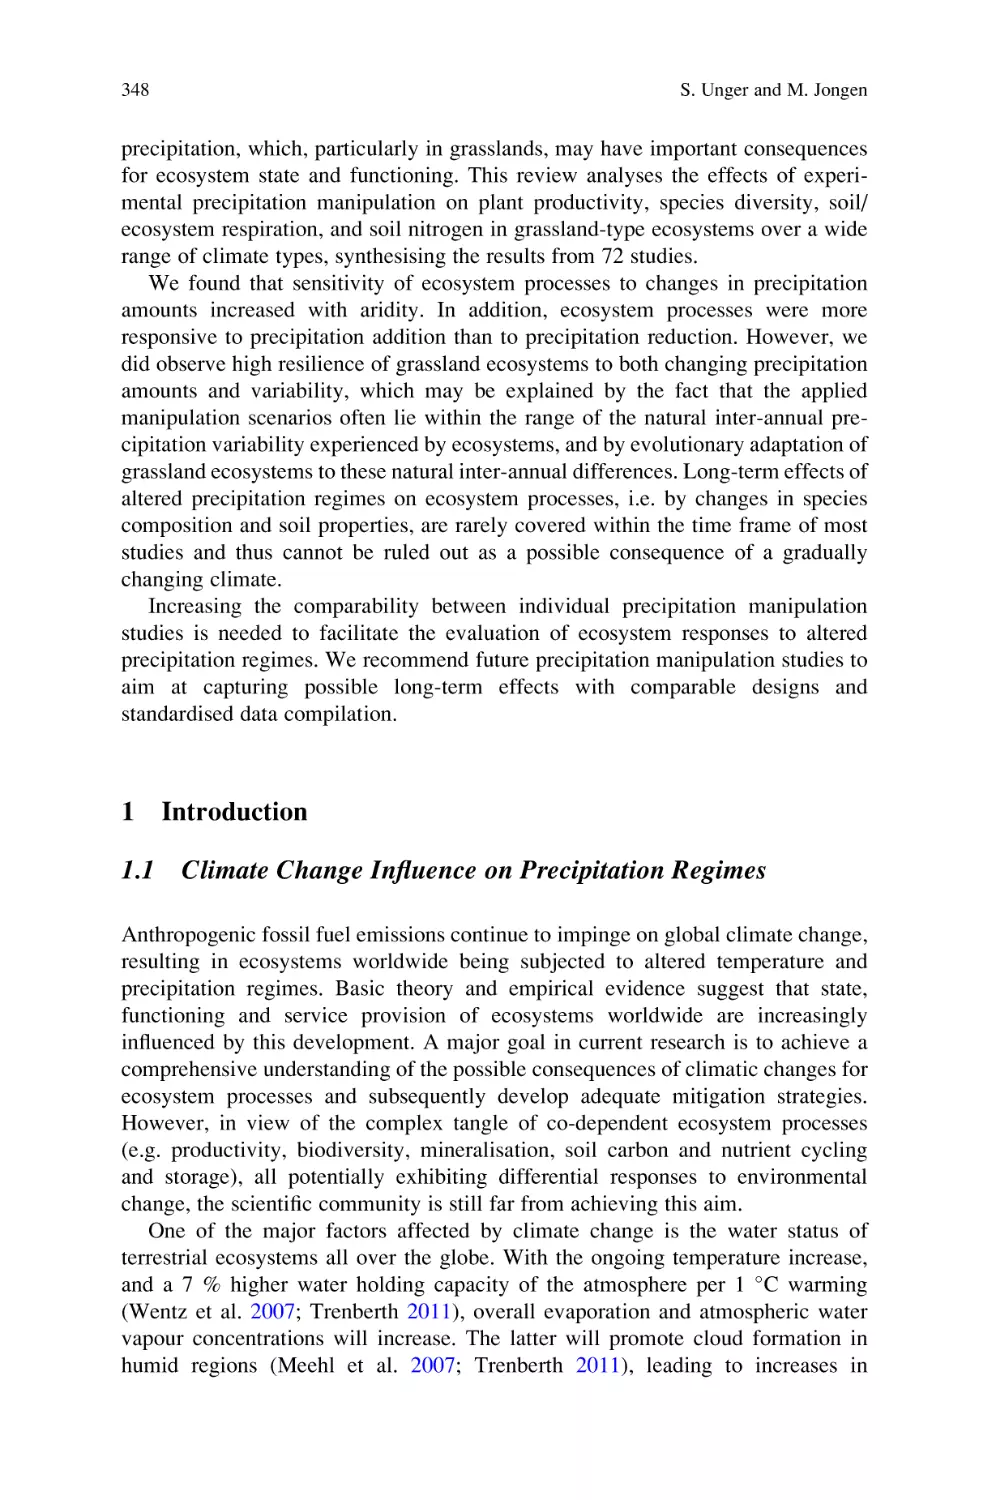 1 Introduction
1.1 Climate Change Influence on Precipitation Regimes